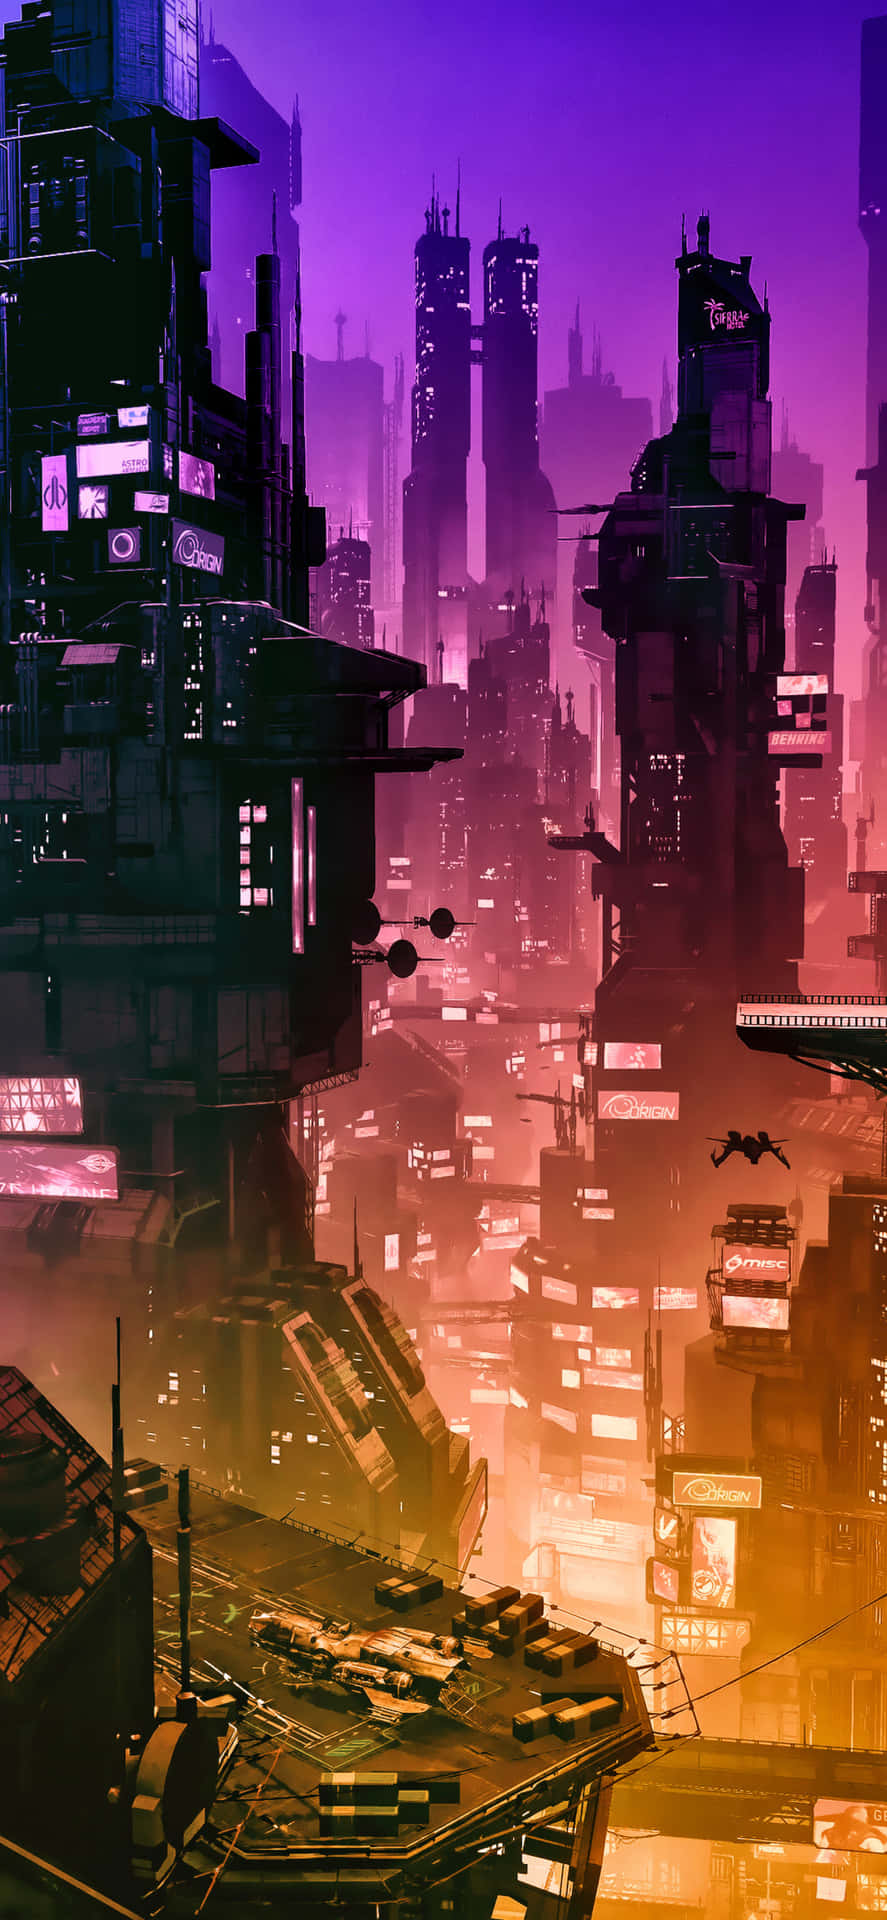 A Futuristic City With Buildings And A Purple Sky